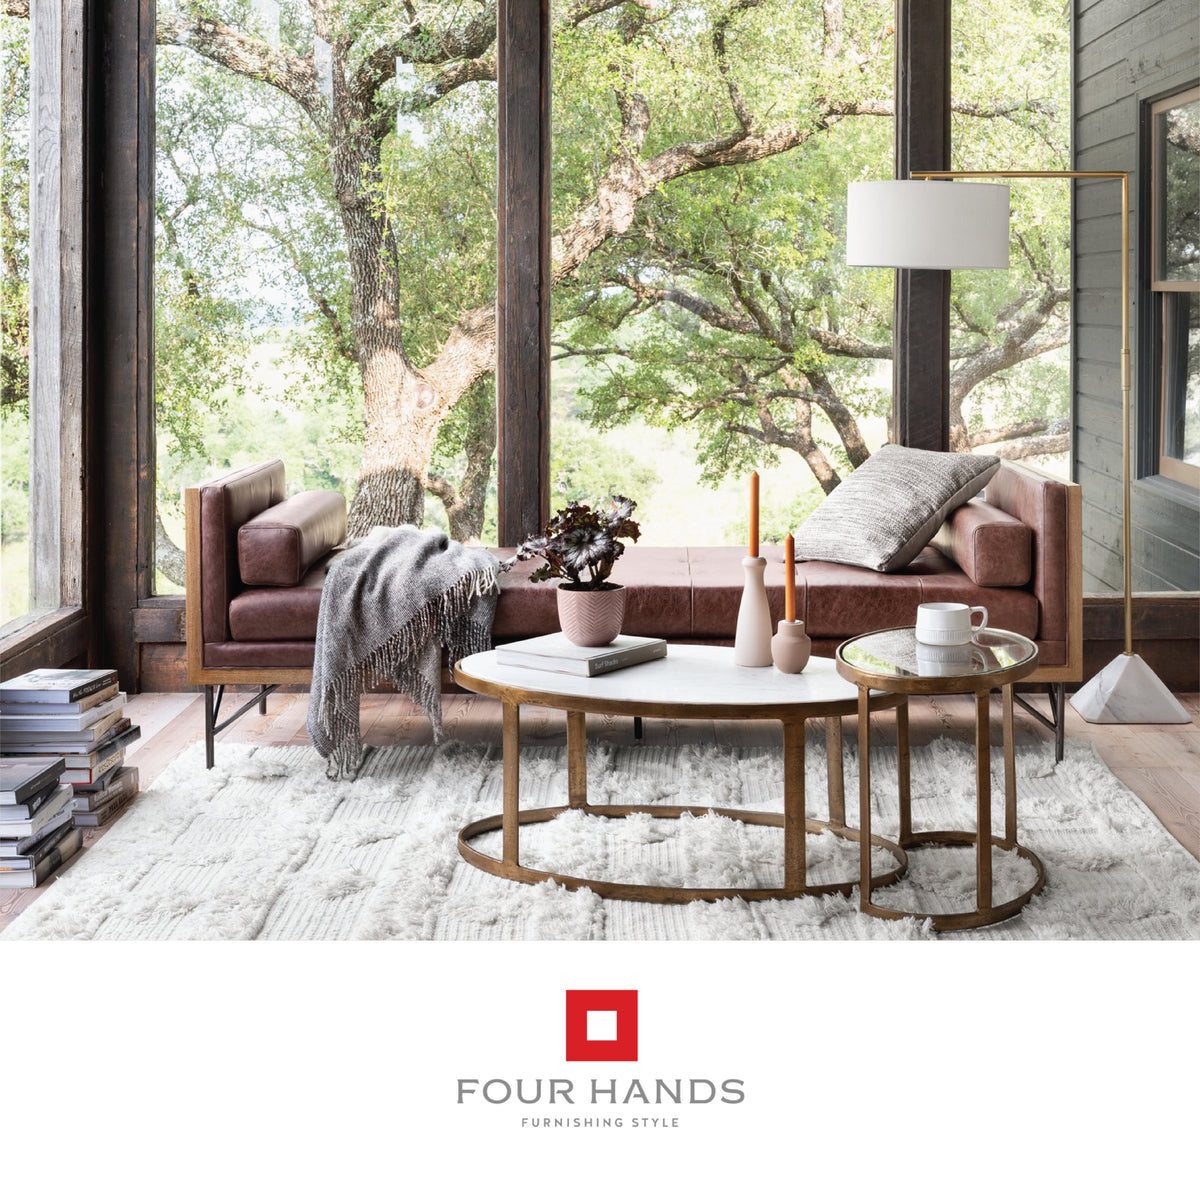 Where to Buy Four Hands Furniture